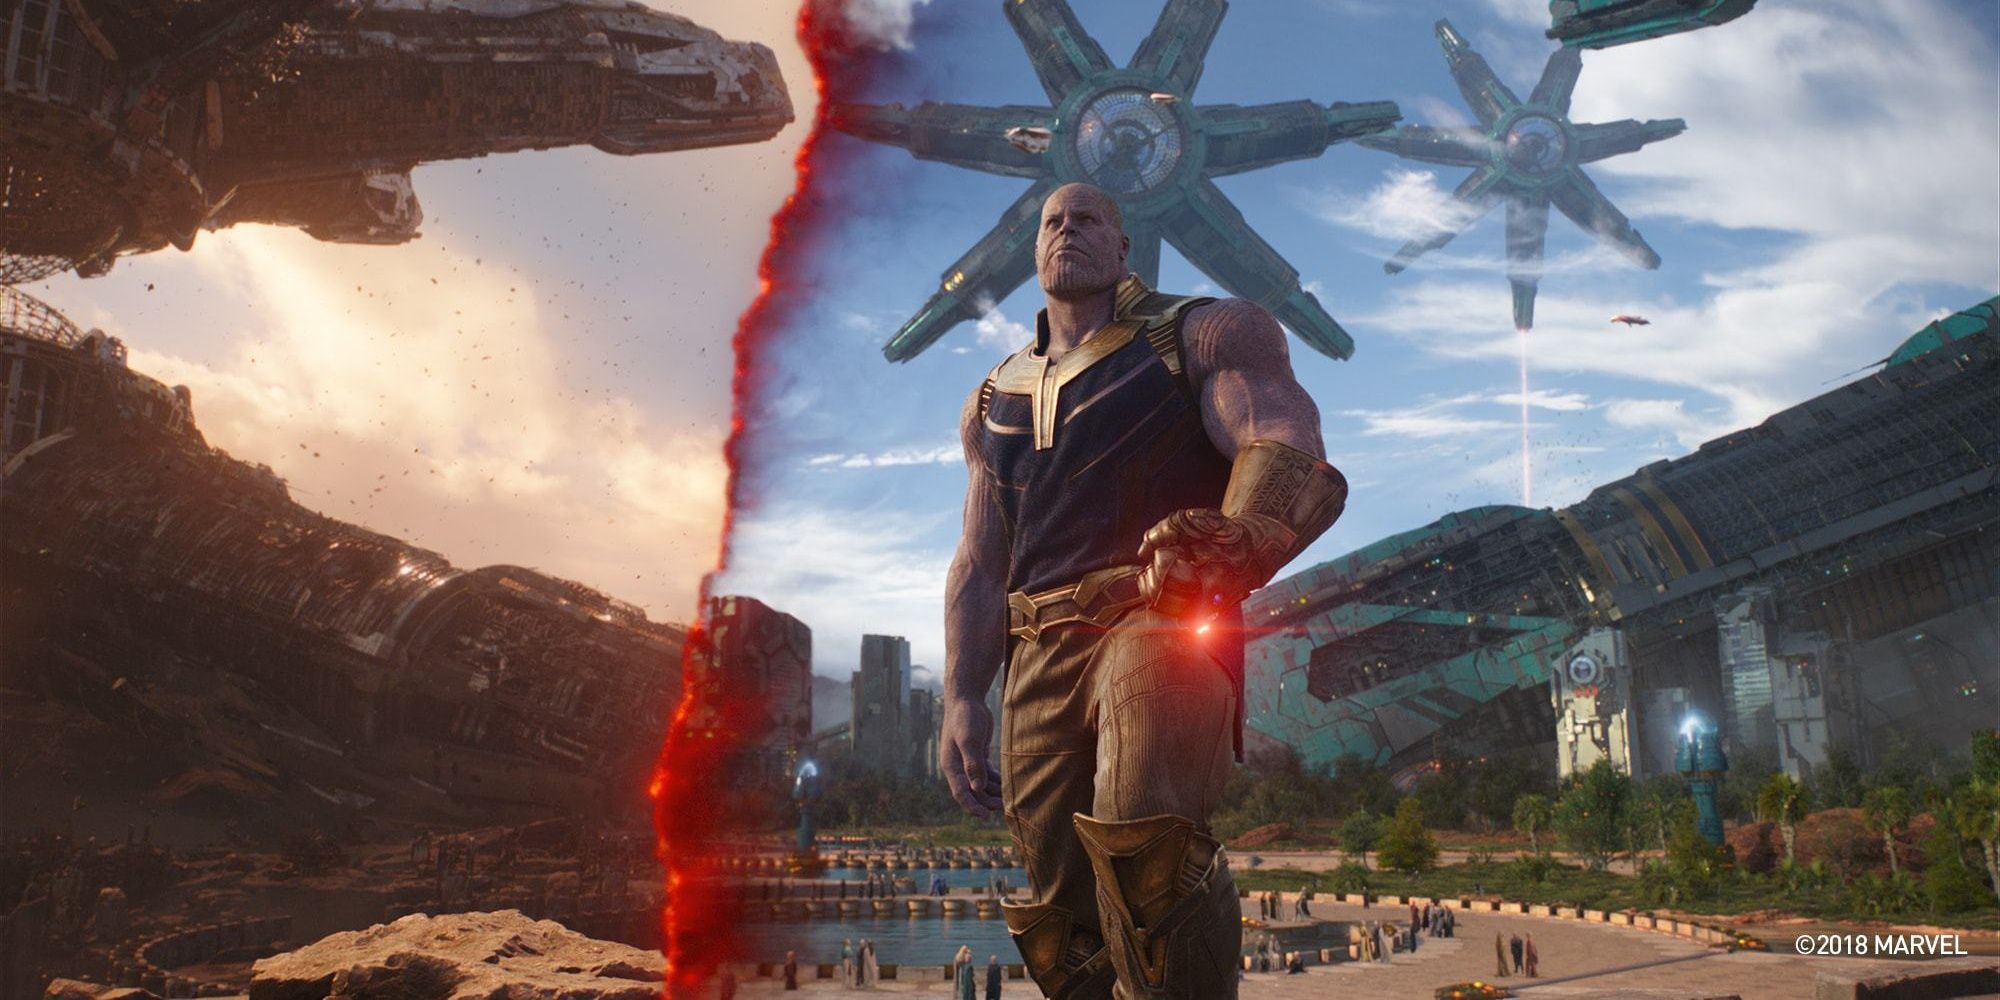 Thanos using the Reality Stone to alter the landscape of Titan